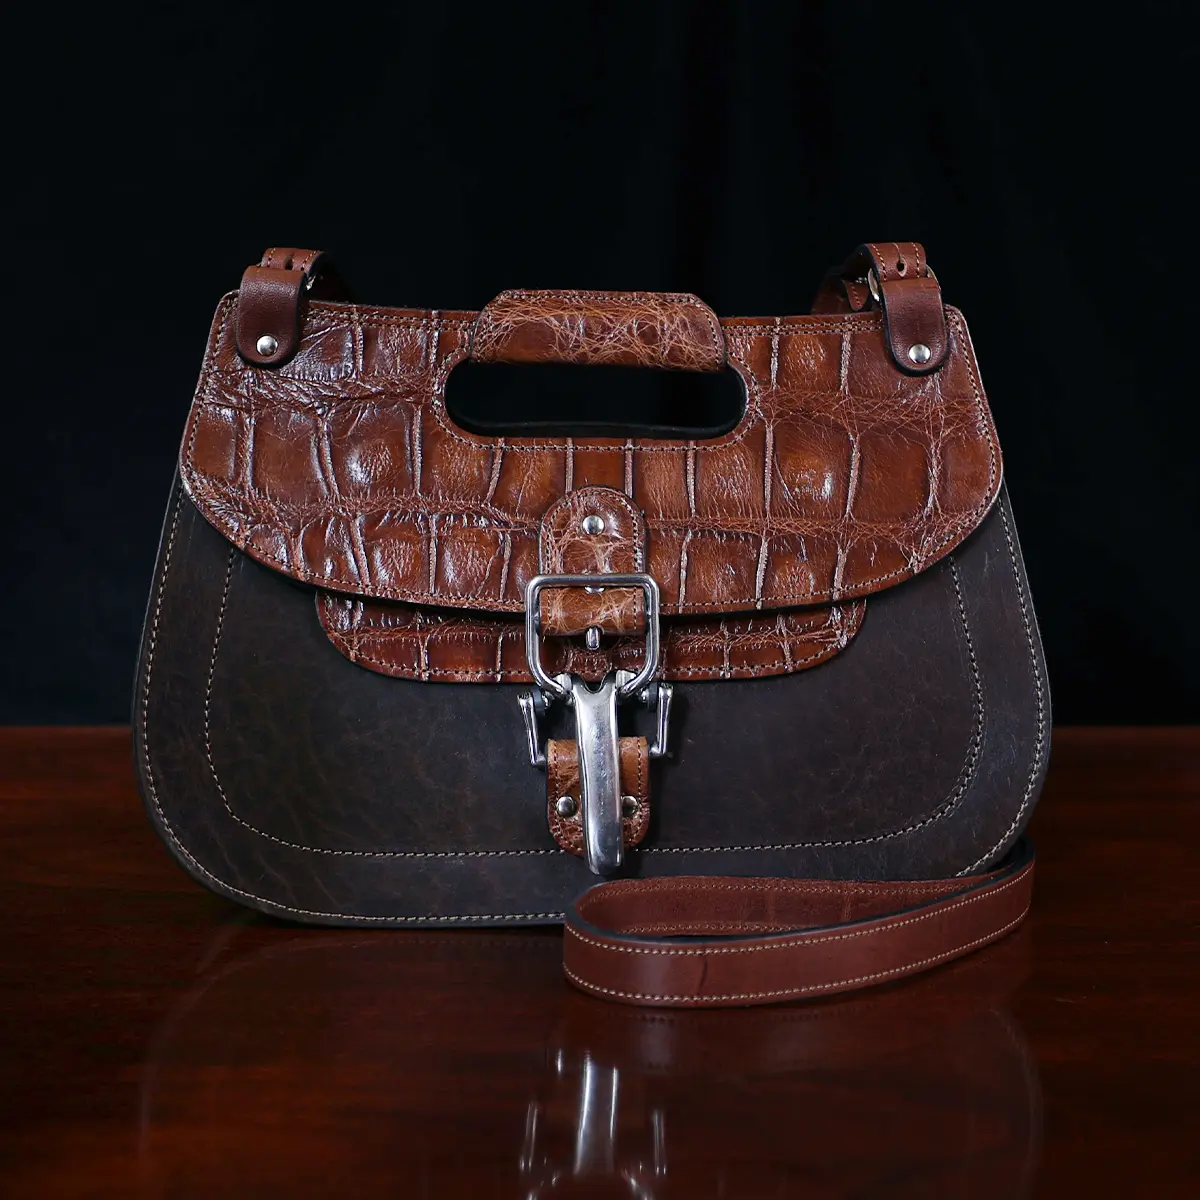 No. 17 Hunt Bag ladies' crossbody in Tobacco Brown American Buffalo and trimmed with American Alligator and Vintage Brown American Steerhide - front view